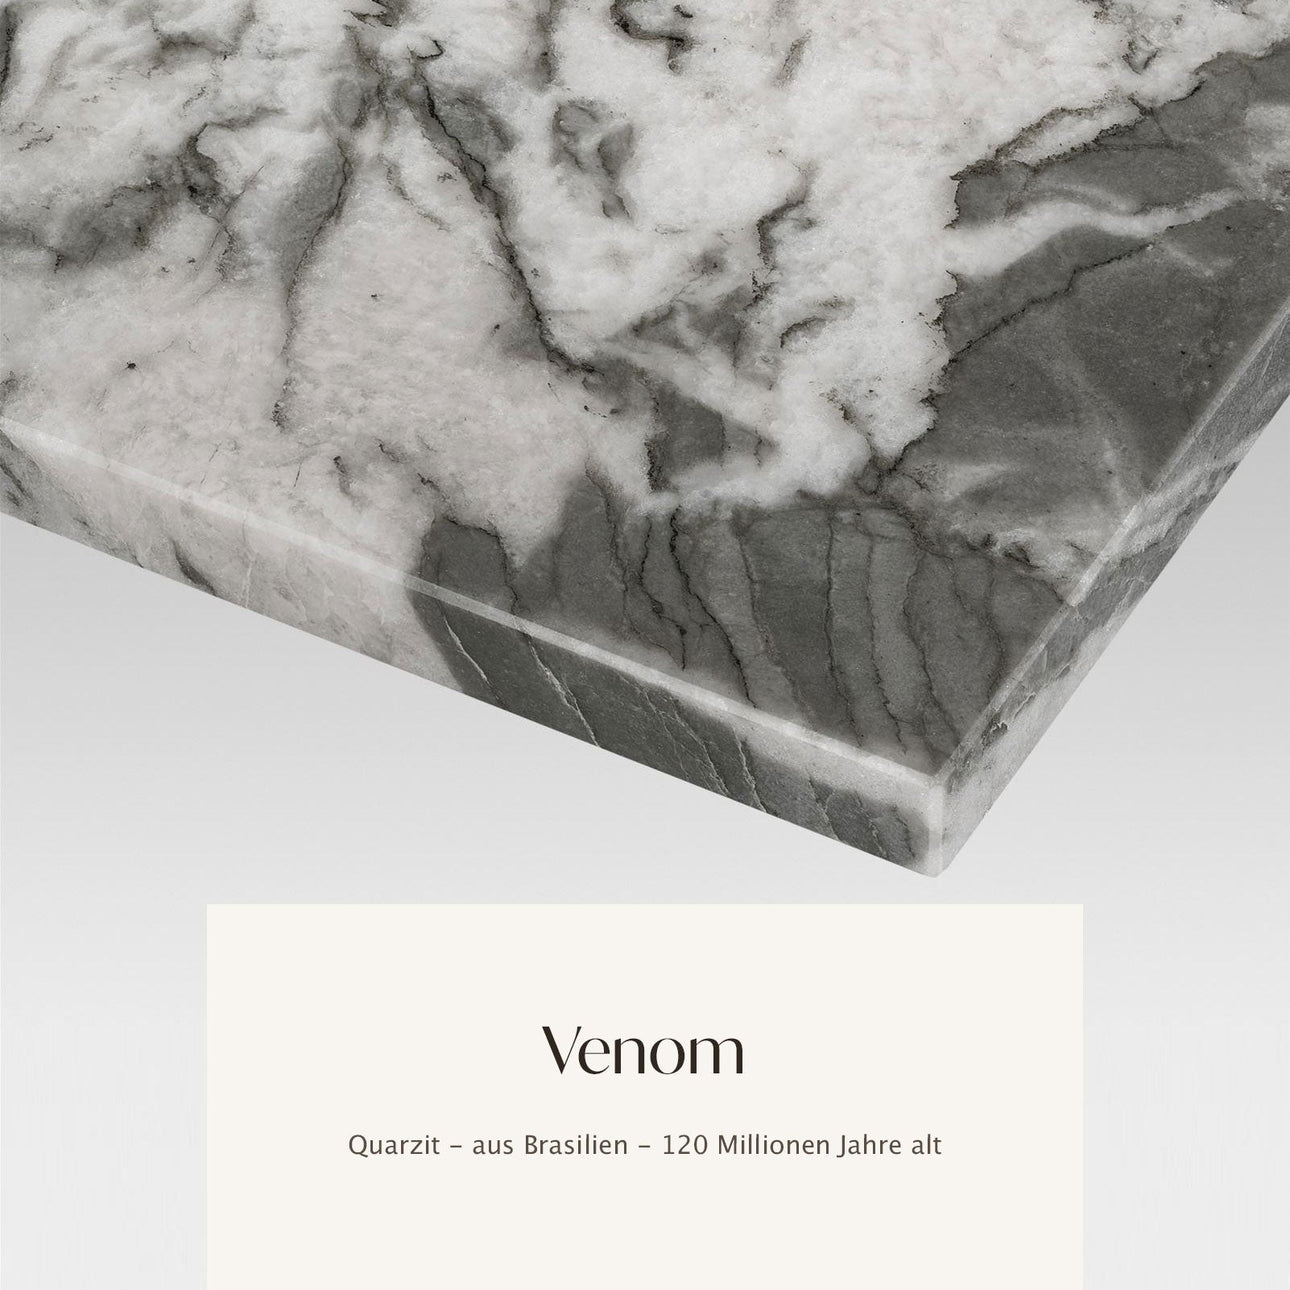 Square marble table top